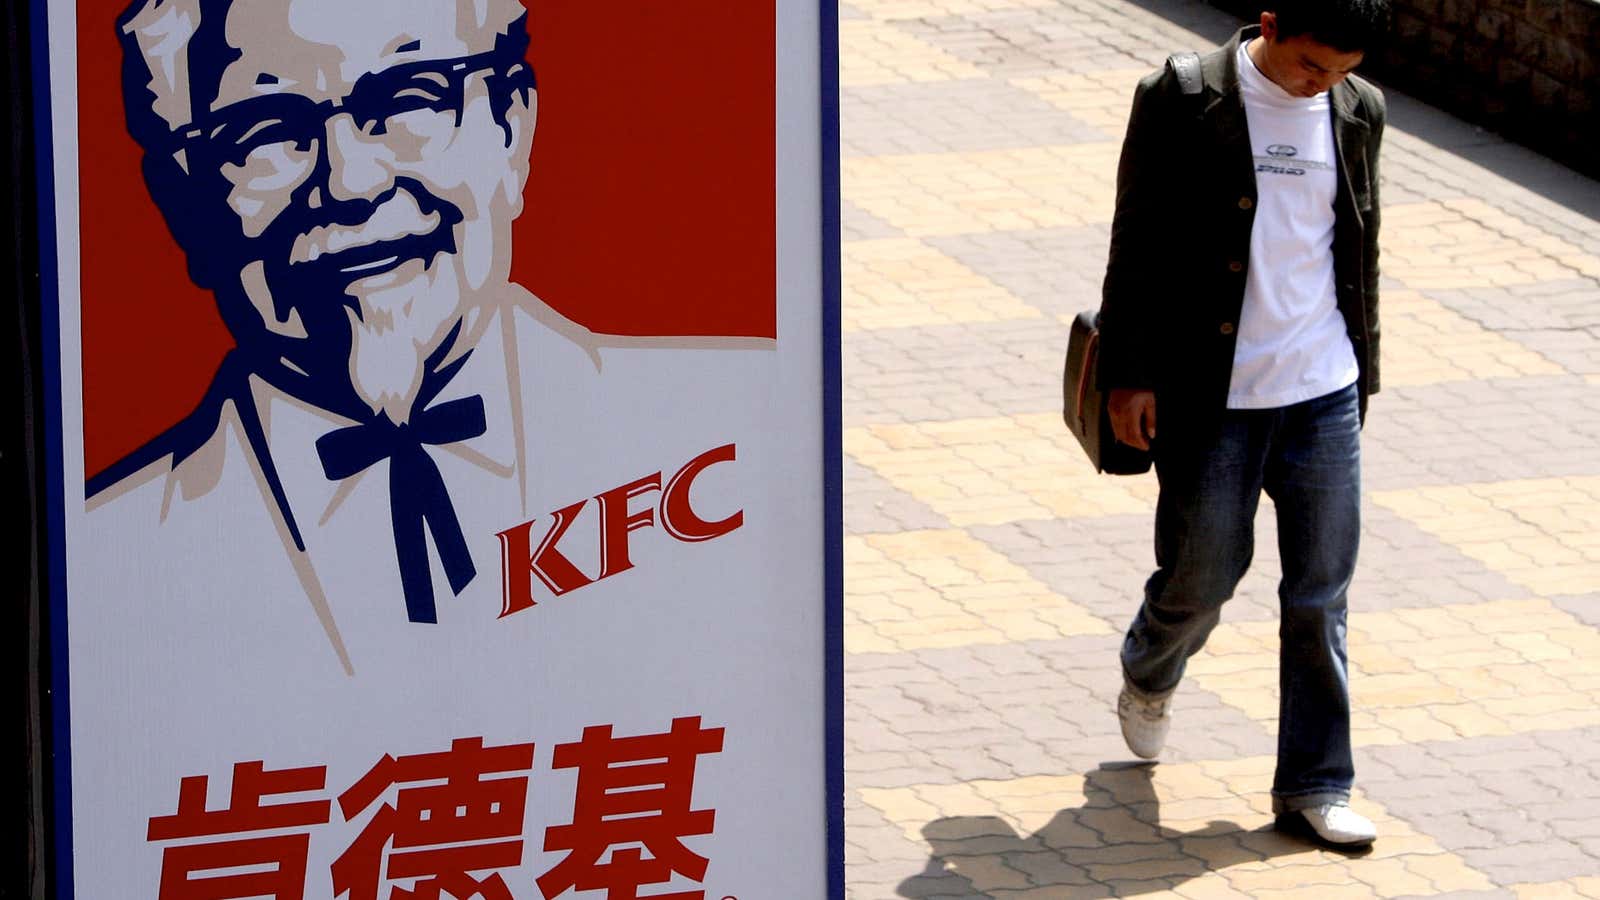 “No thank you.” Yum Brands’   China sales are falling as consumers think its KFC chicken may be unsafe.